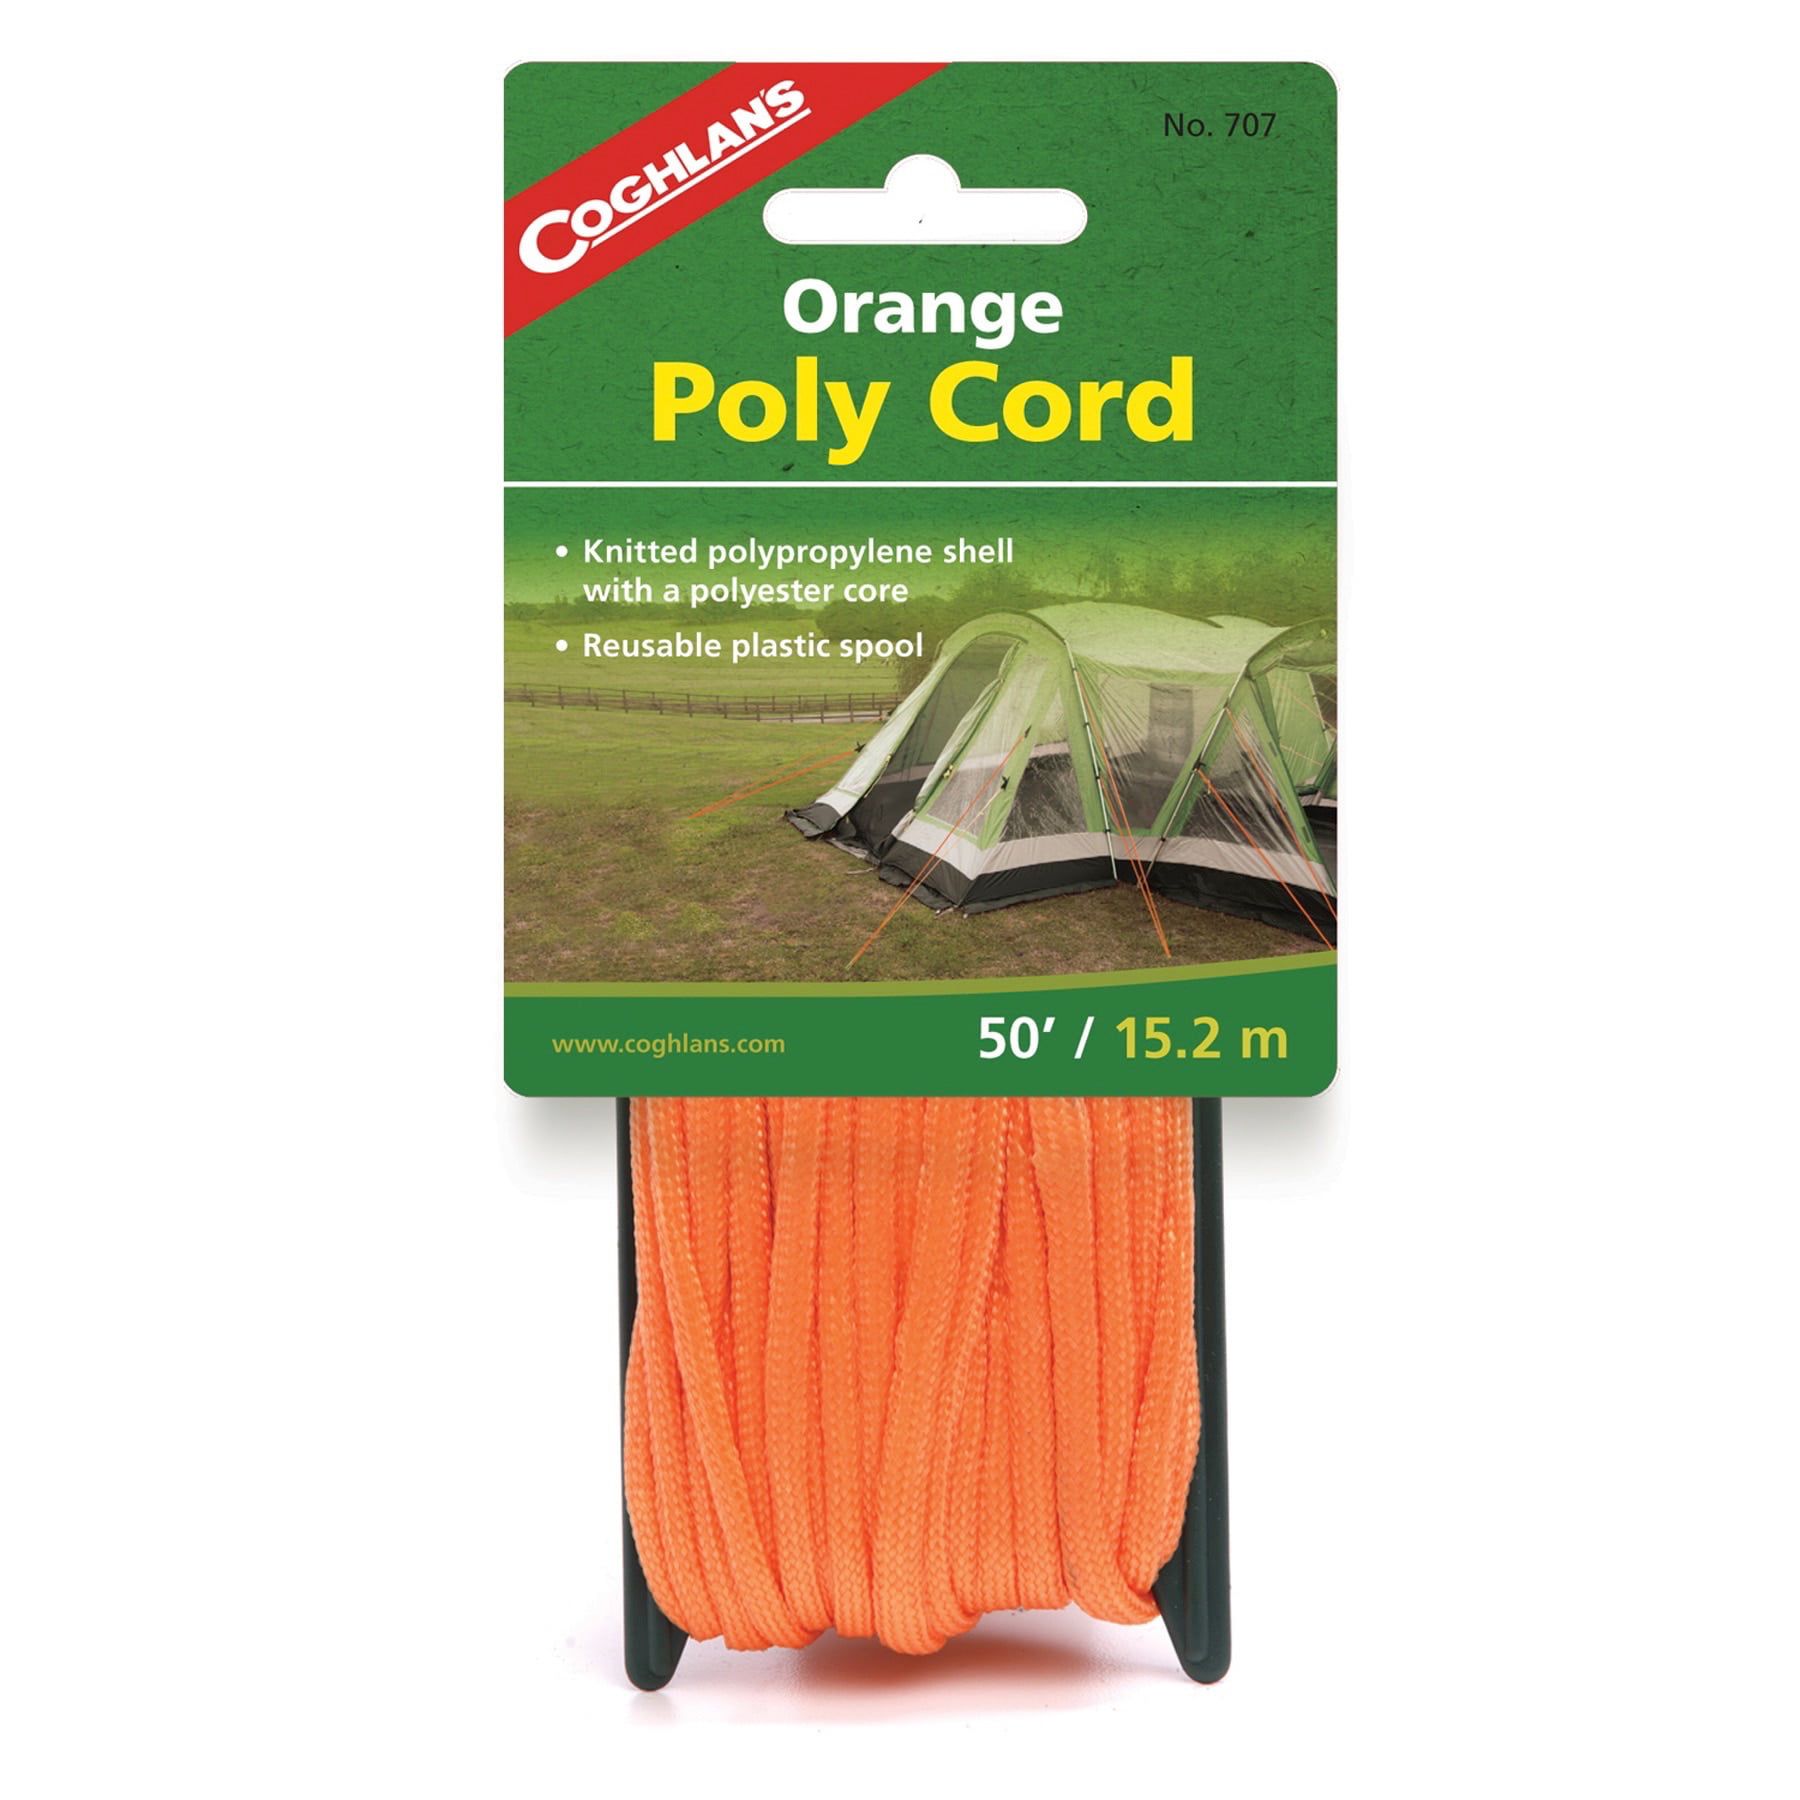 Coghlan's Multi Purpose Utility Cord Polypropylene Rope for Guy Line Clothesline 